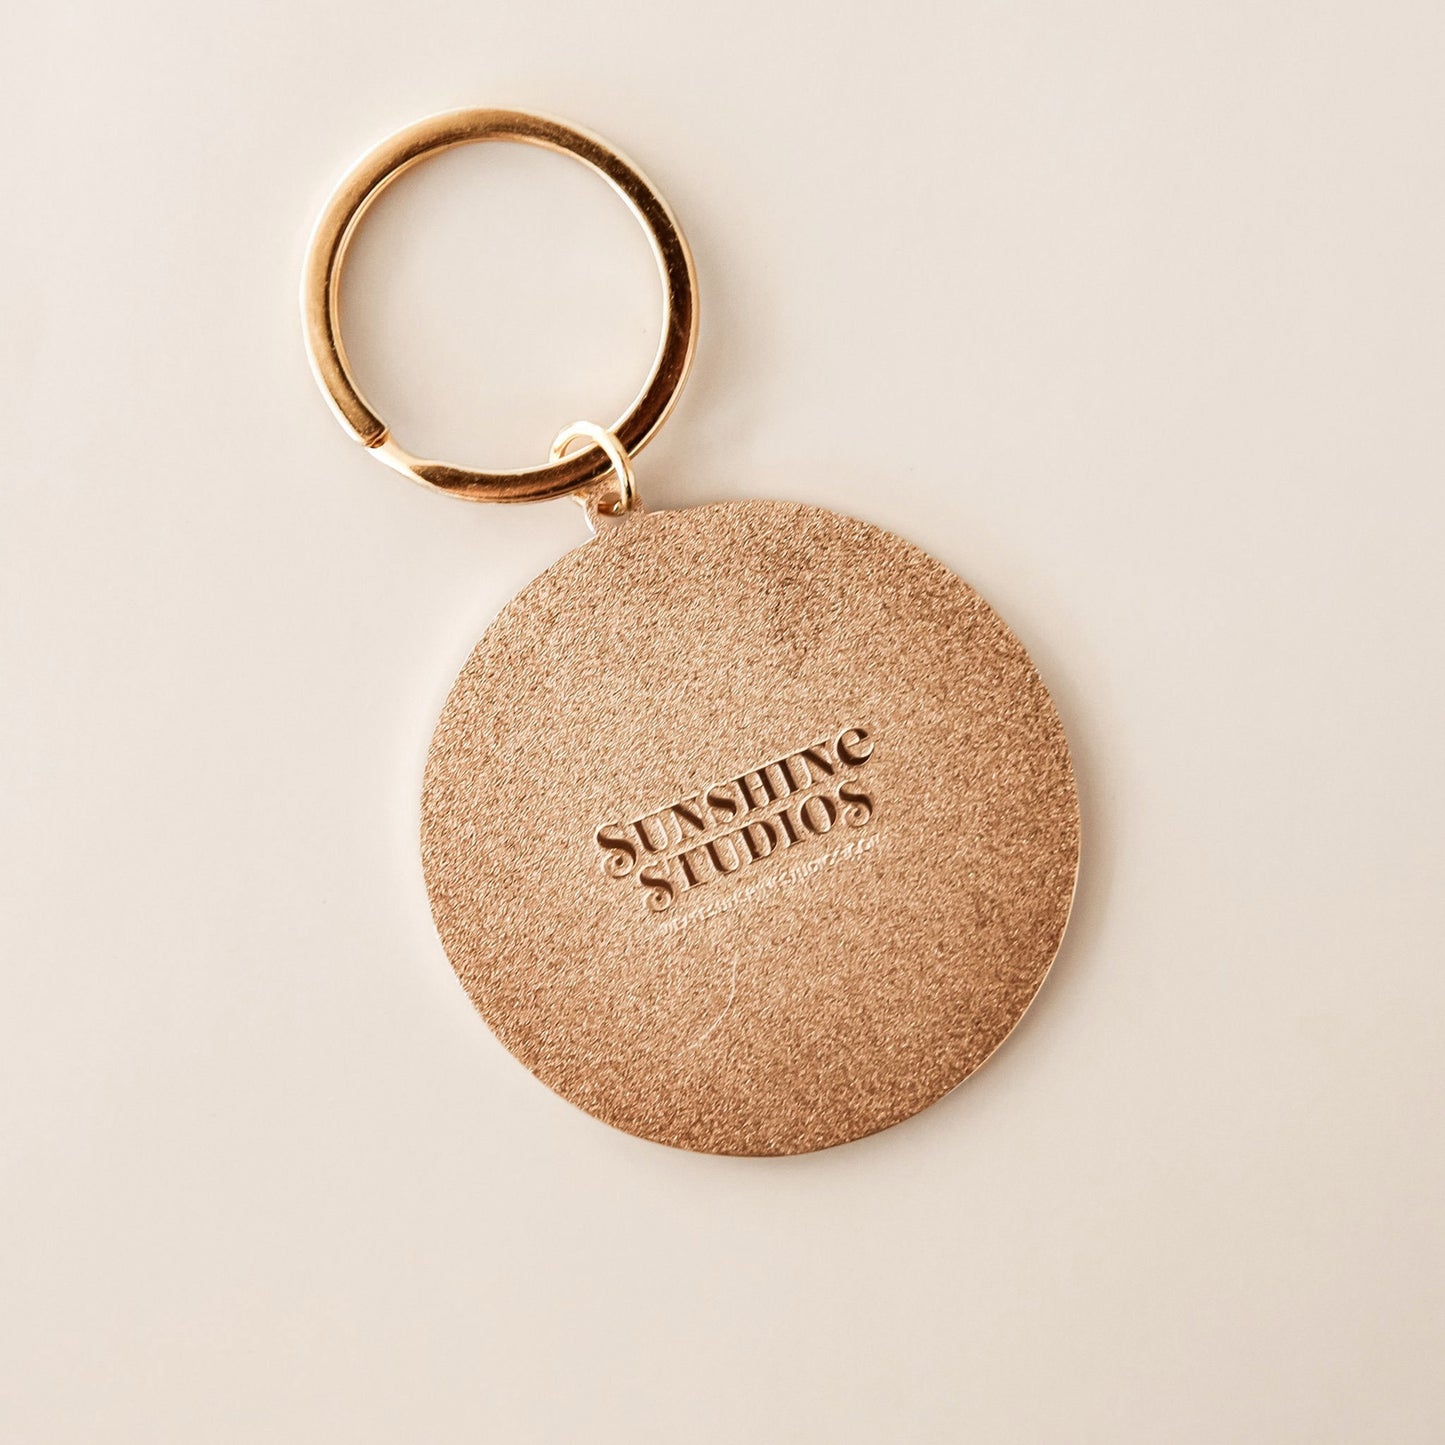 Textured backside of round keychain reading 'sunshine studios' in raised lettering. The keychain is complete with a golden keychain loop. 